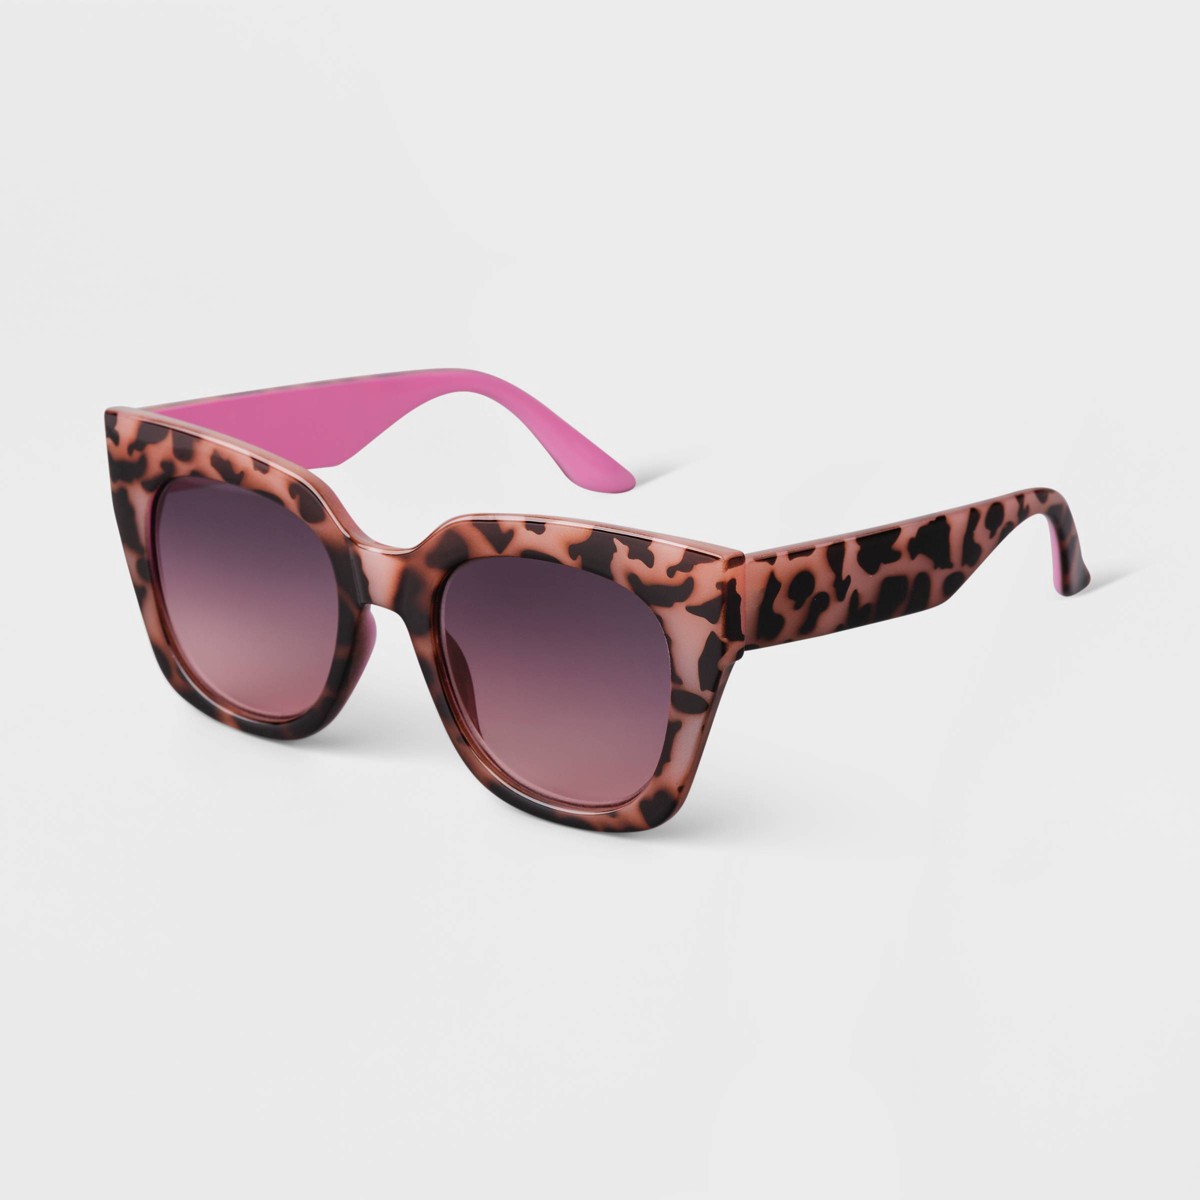 slide 2 of 2, Women's Oversized Two-Tone Tortoise Shell Cateye Sunglasses - A New Day Tan, 1 ct